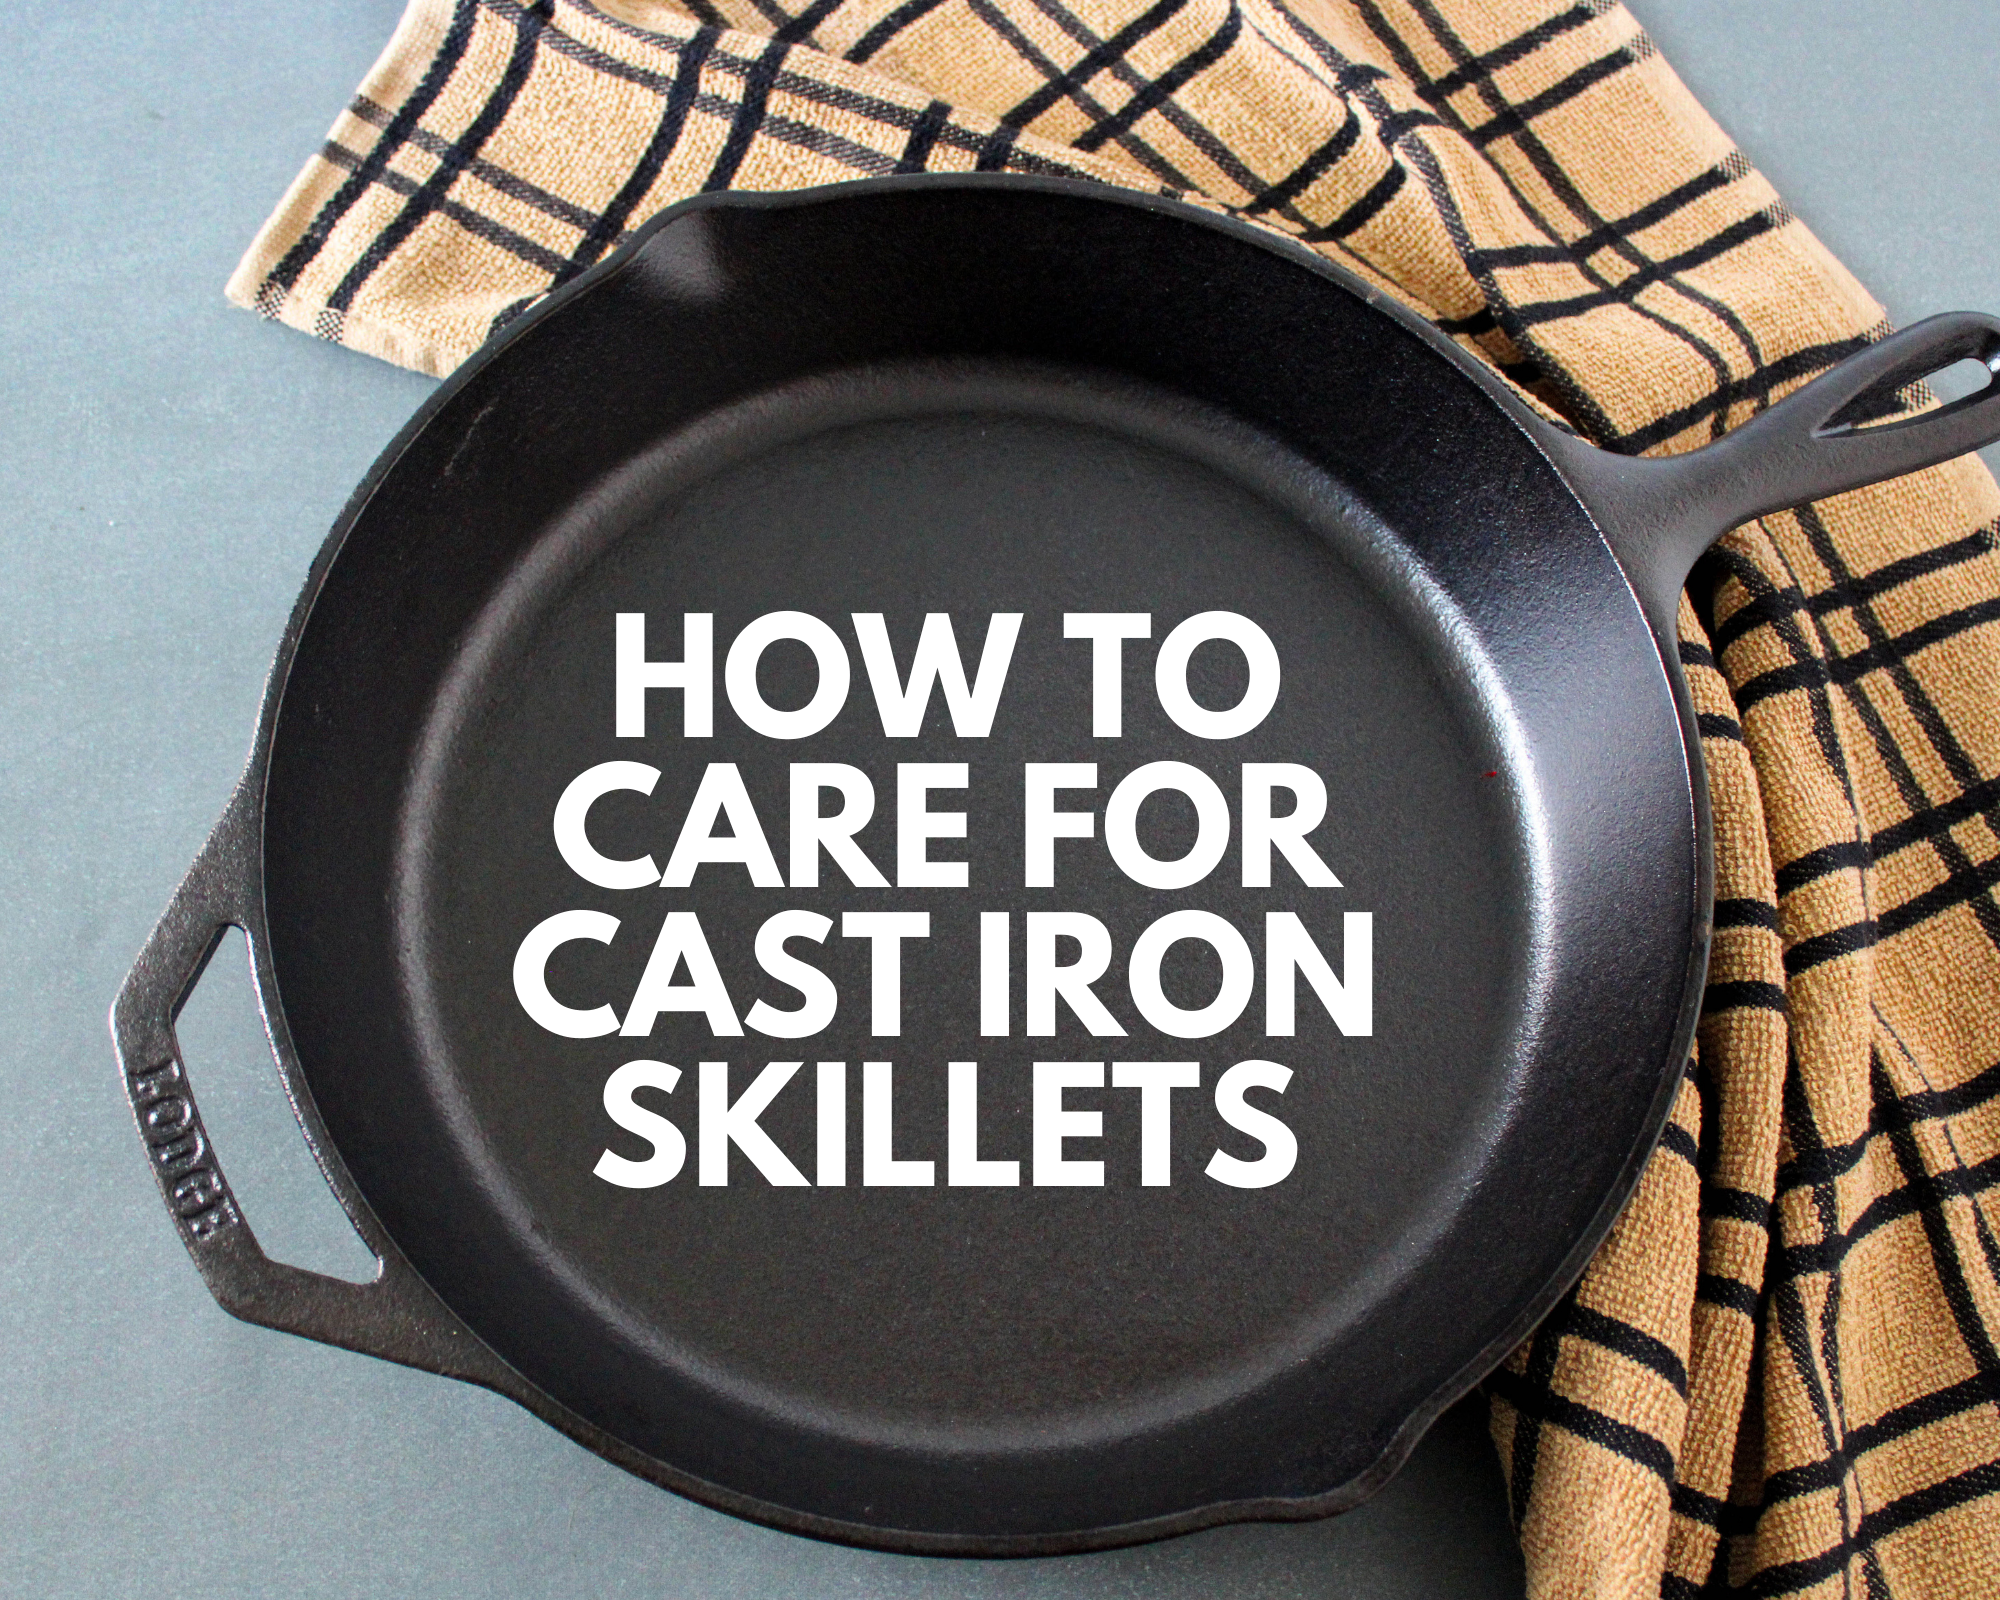 https://www.justapinch.com/blog/wp-content/uploads/2022/03/63e20d08-how-to-care-for-cast-iron-skillets.png